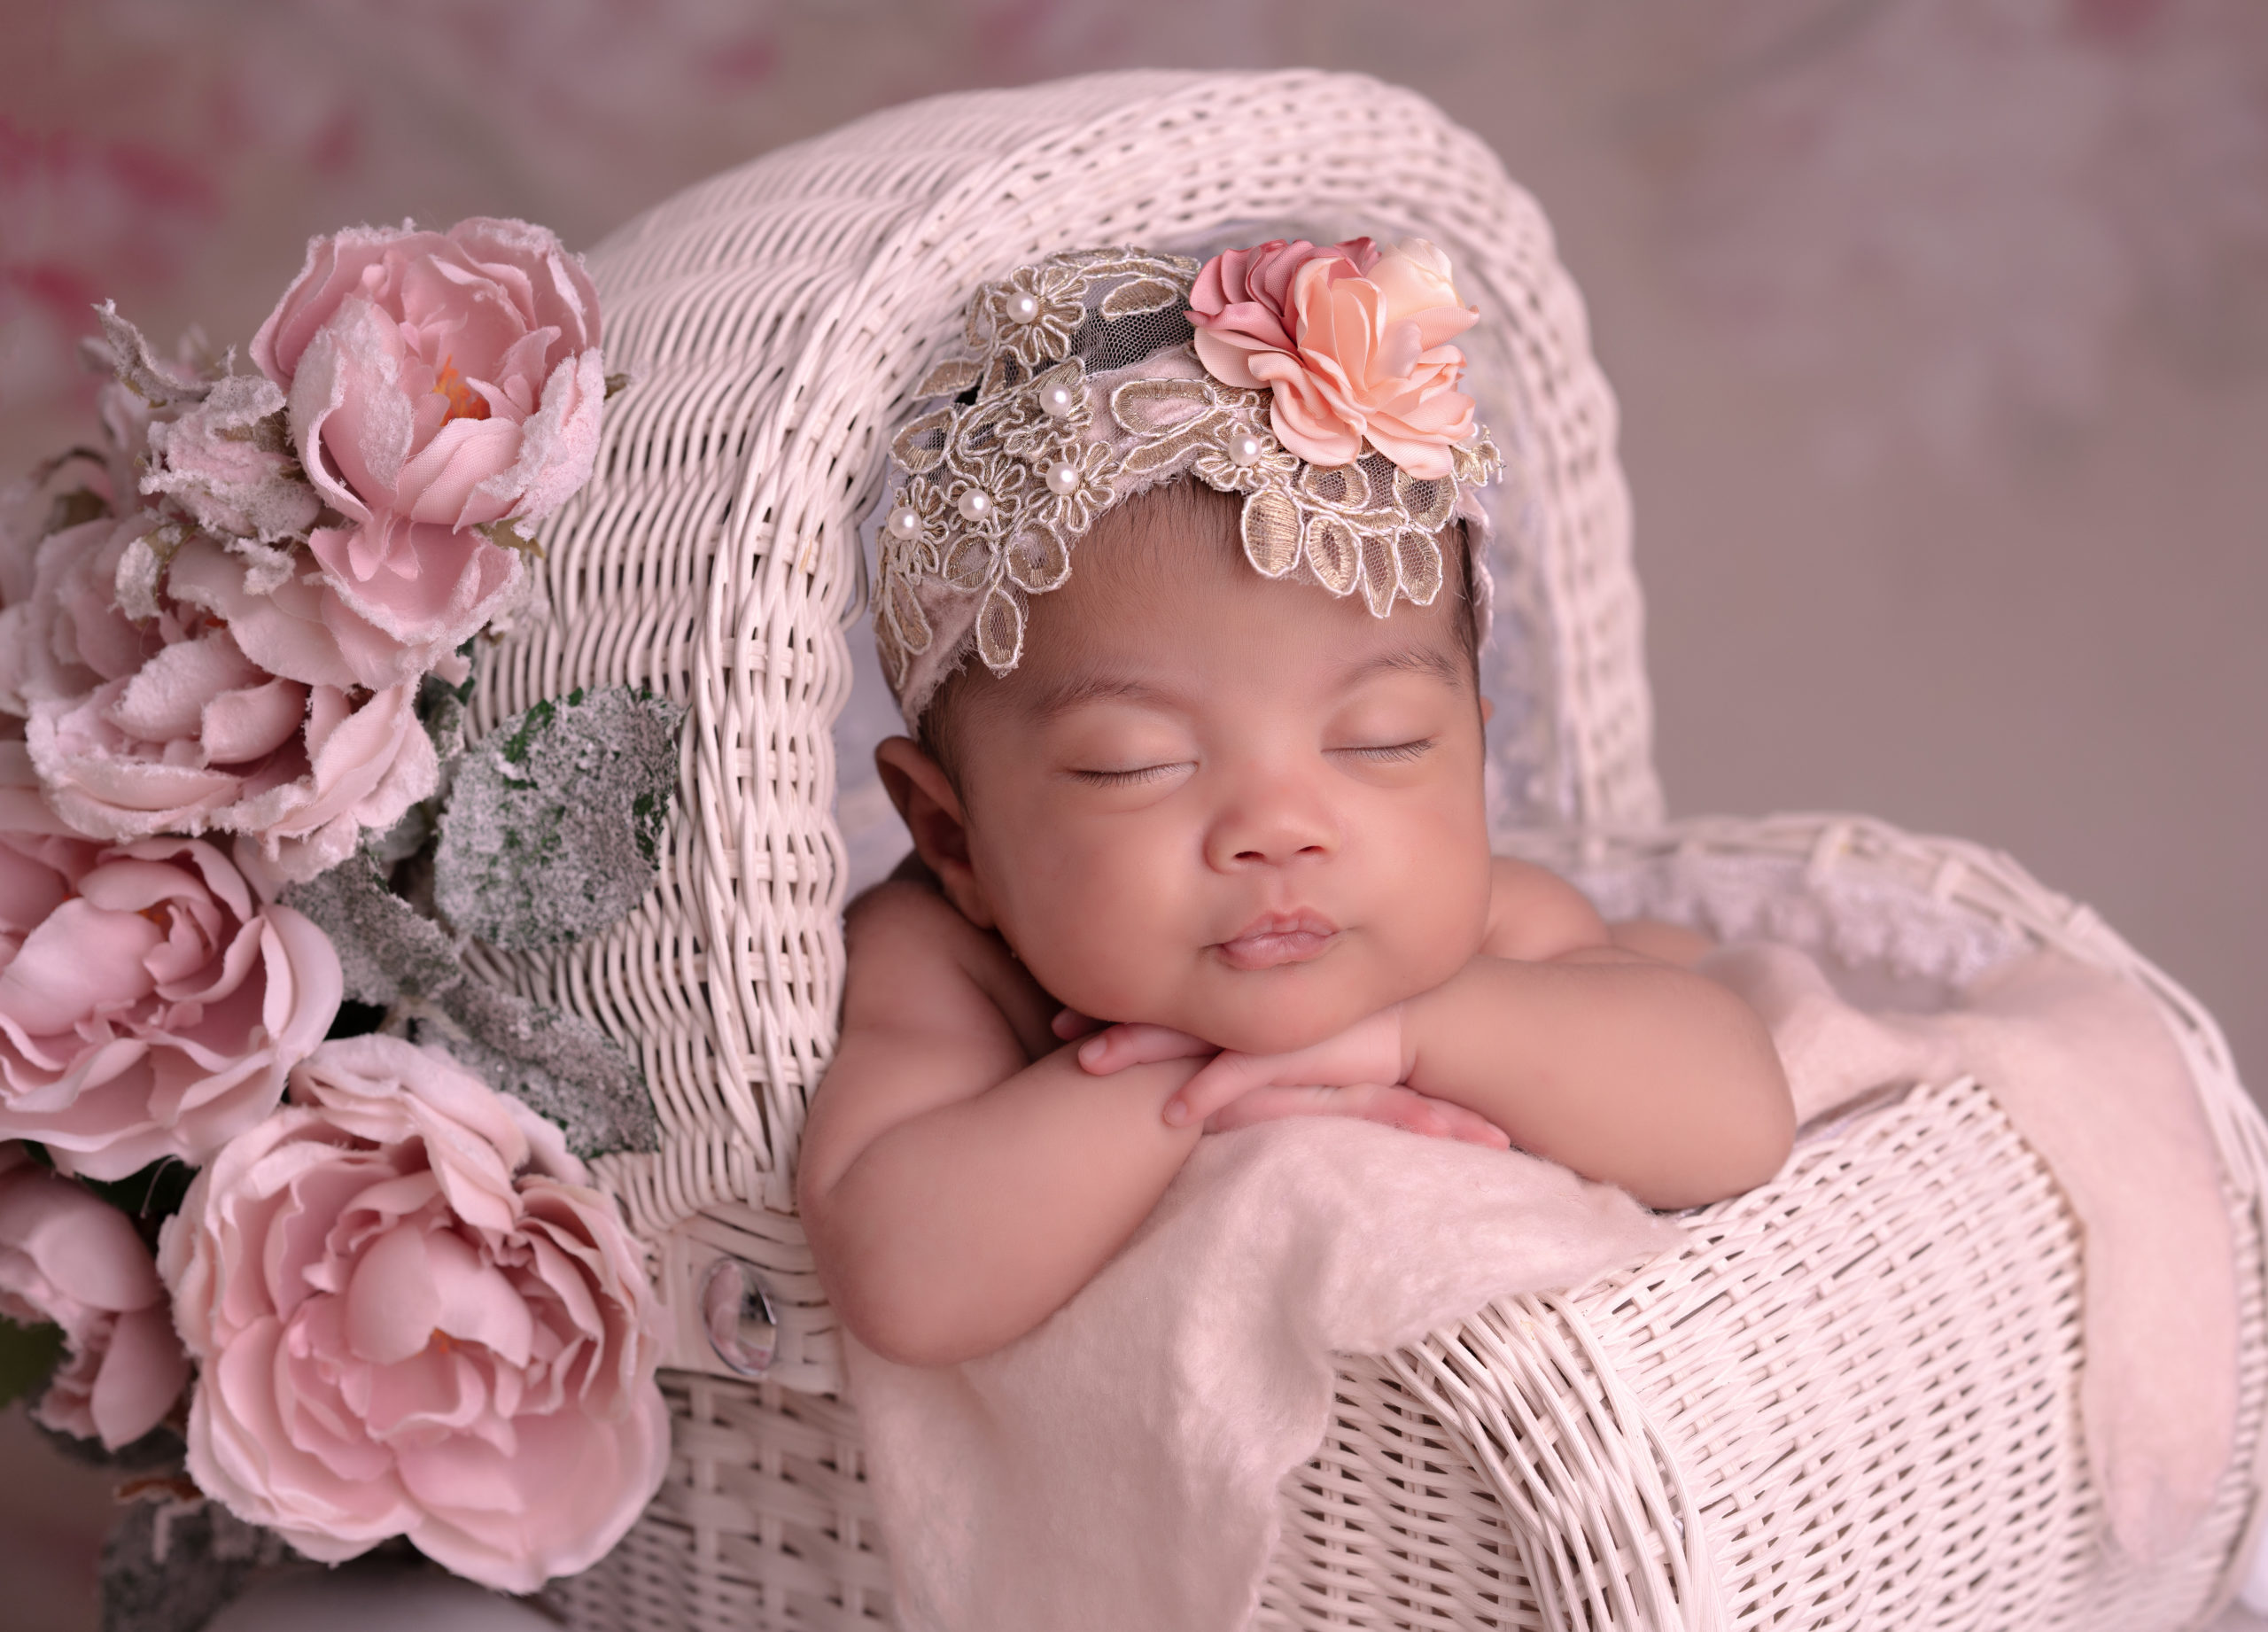 Newborn Photography 101: Everything You Need to Know